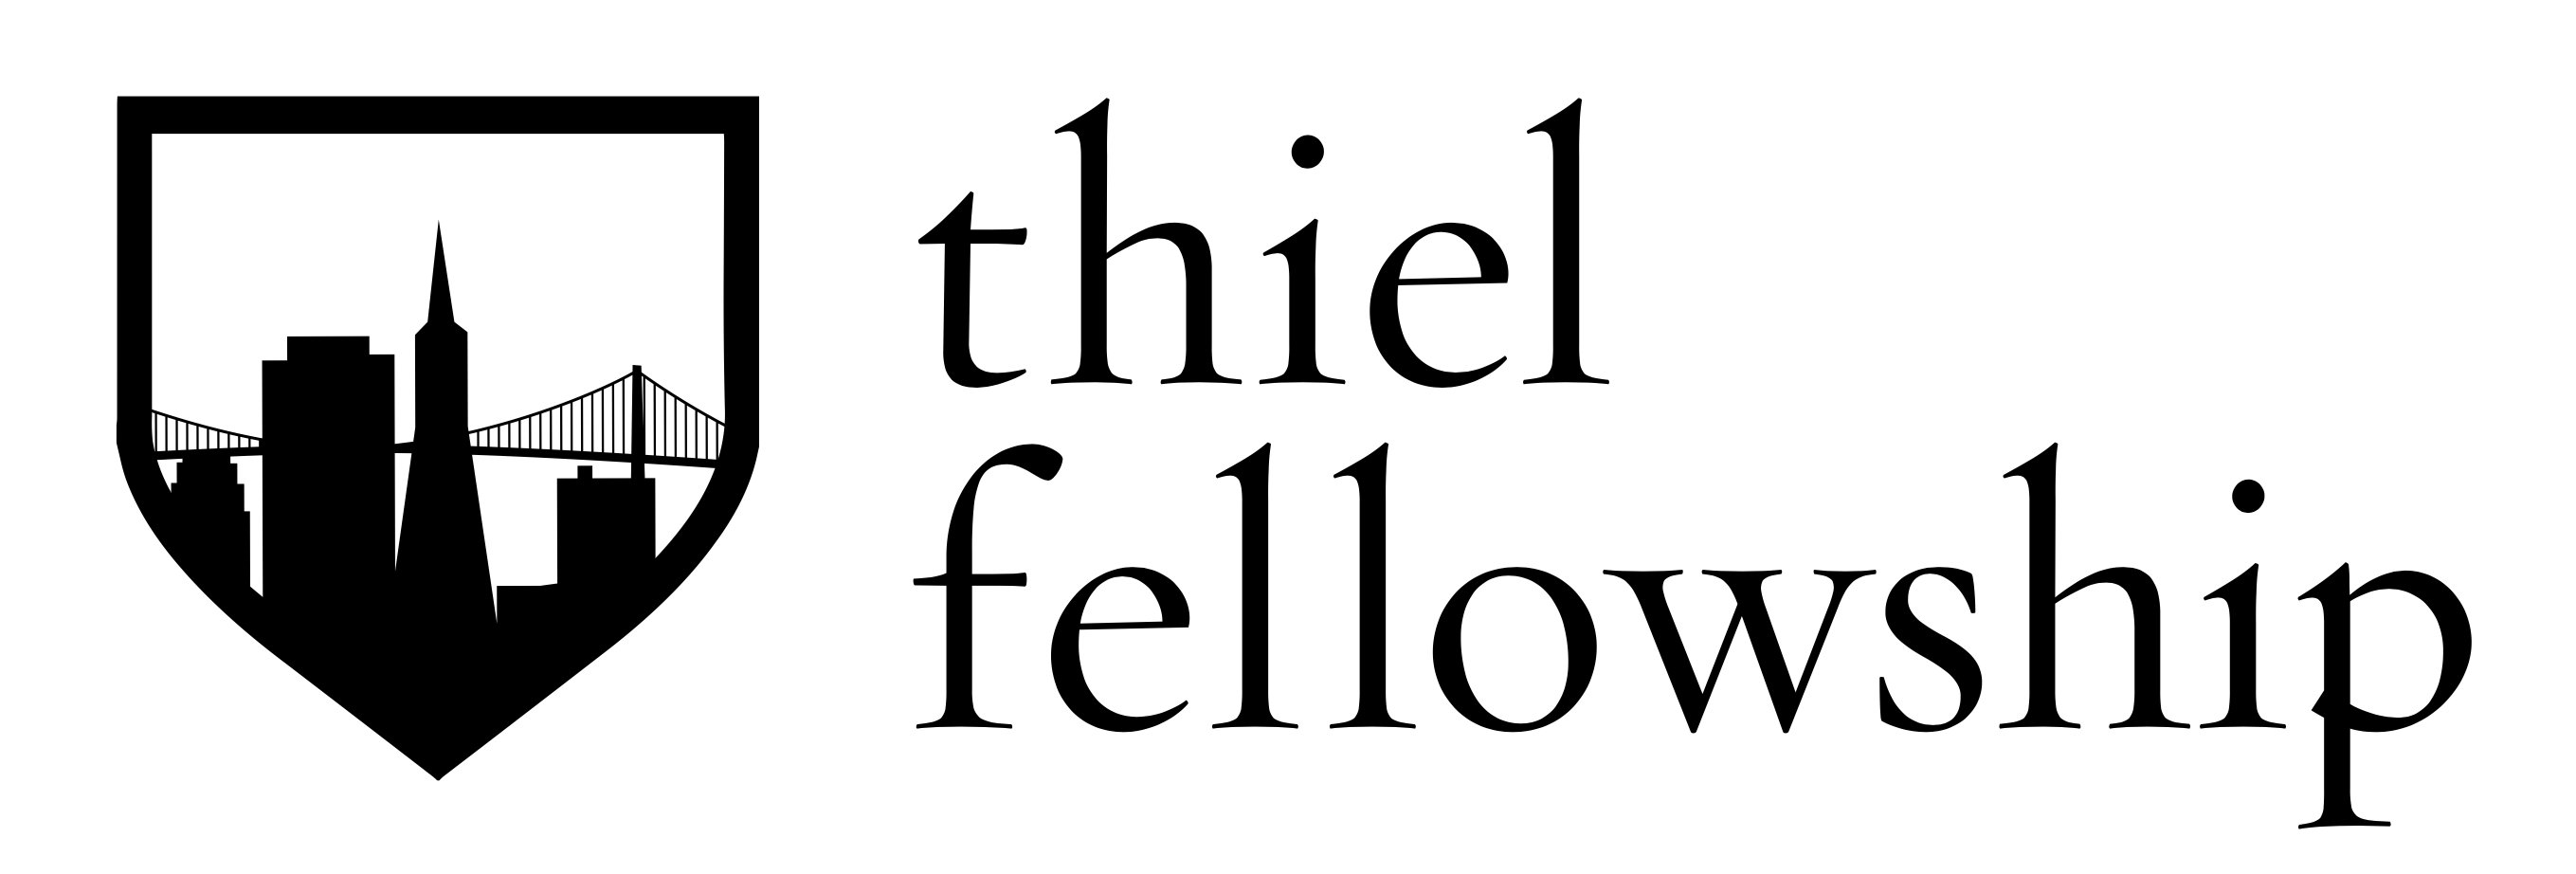 RoundPie App and the Thiel Fellowship partnership